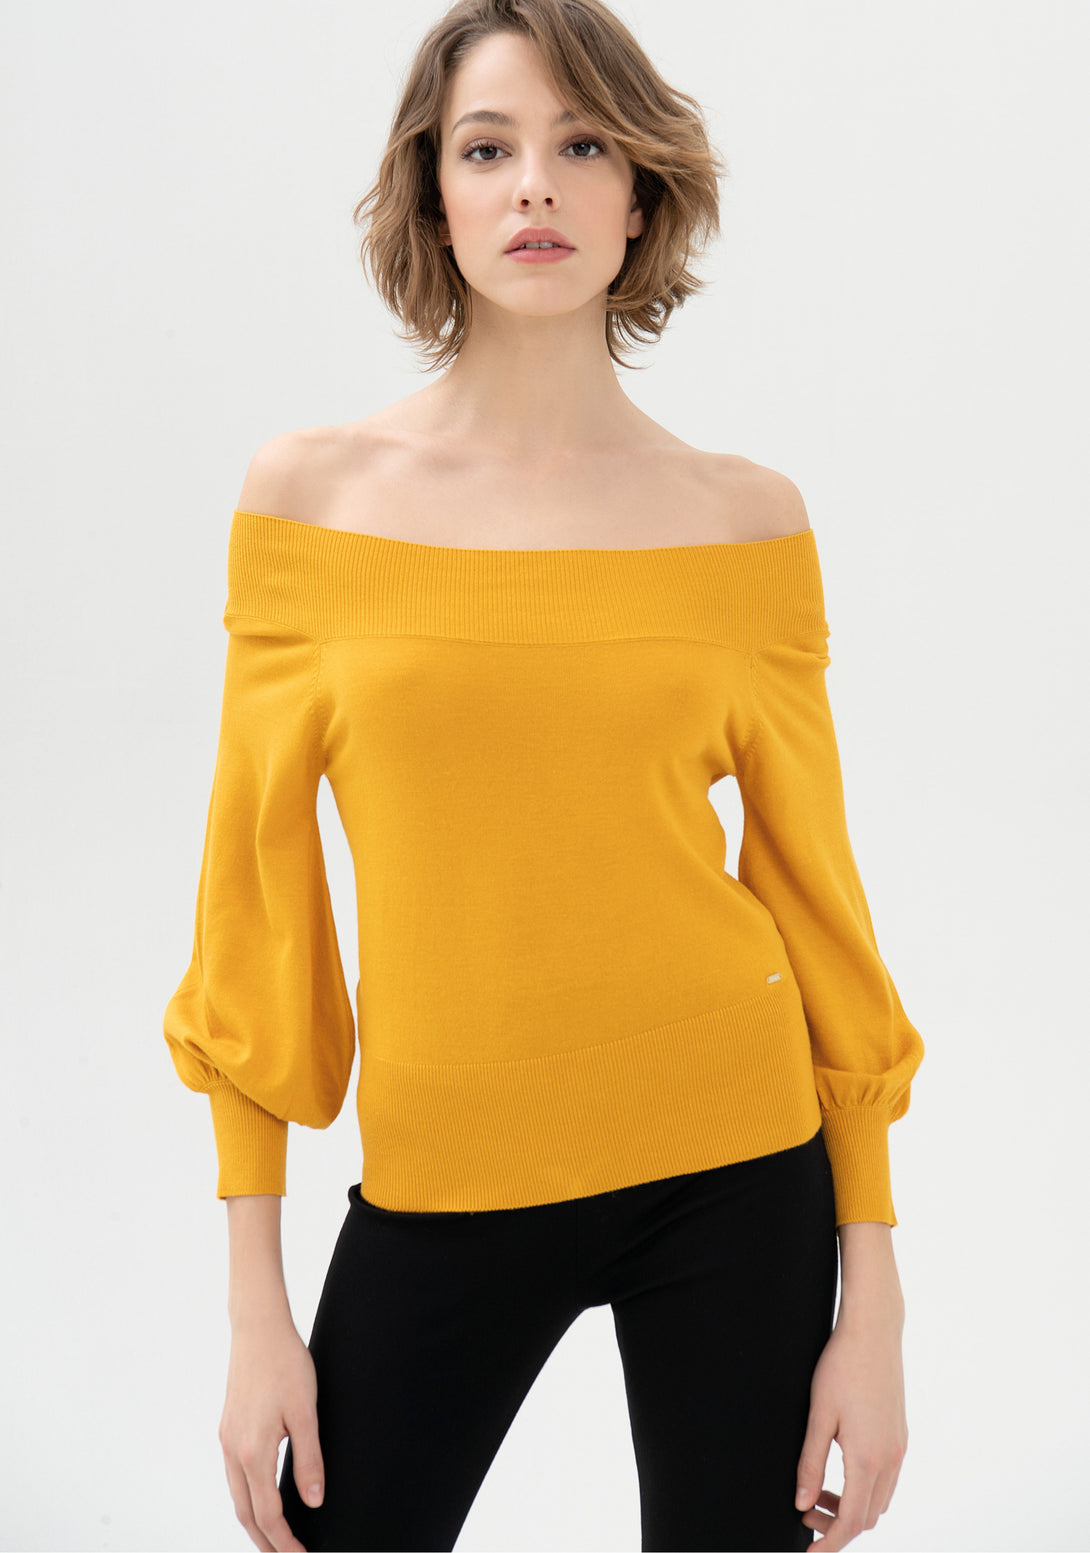 Knitwear tight fit with Bardot style neck